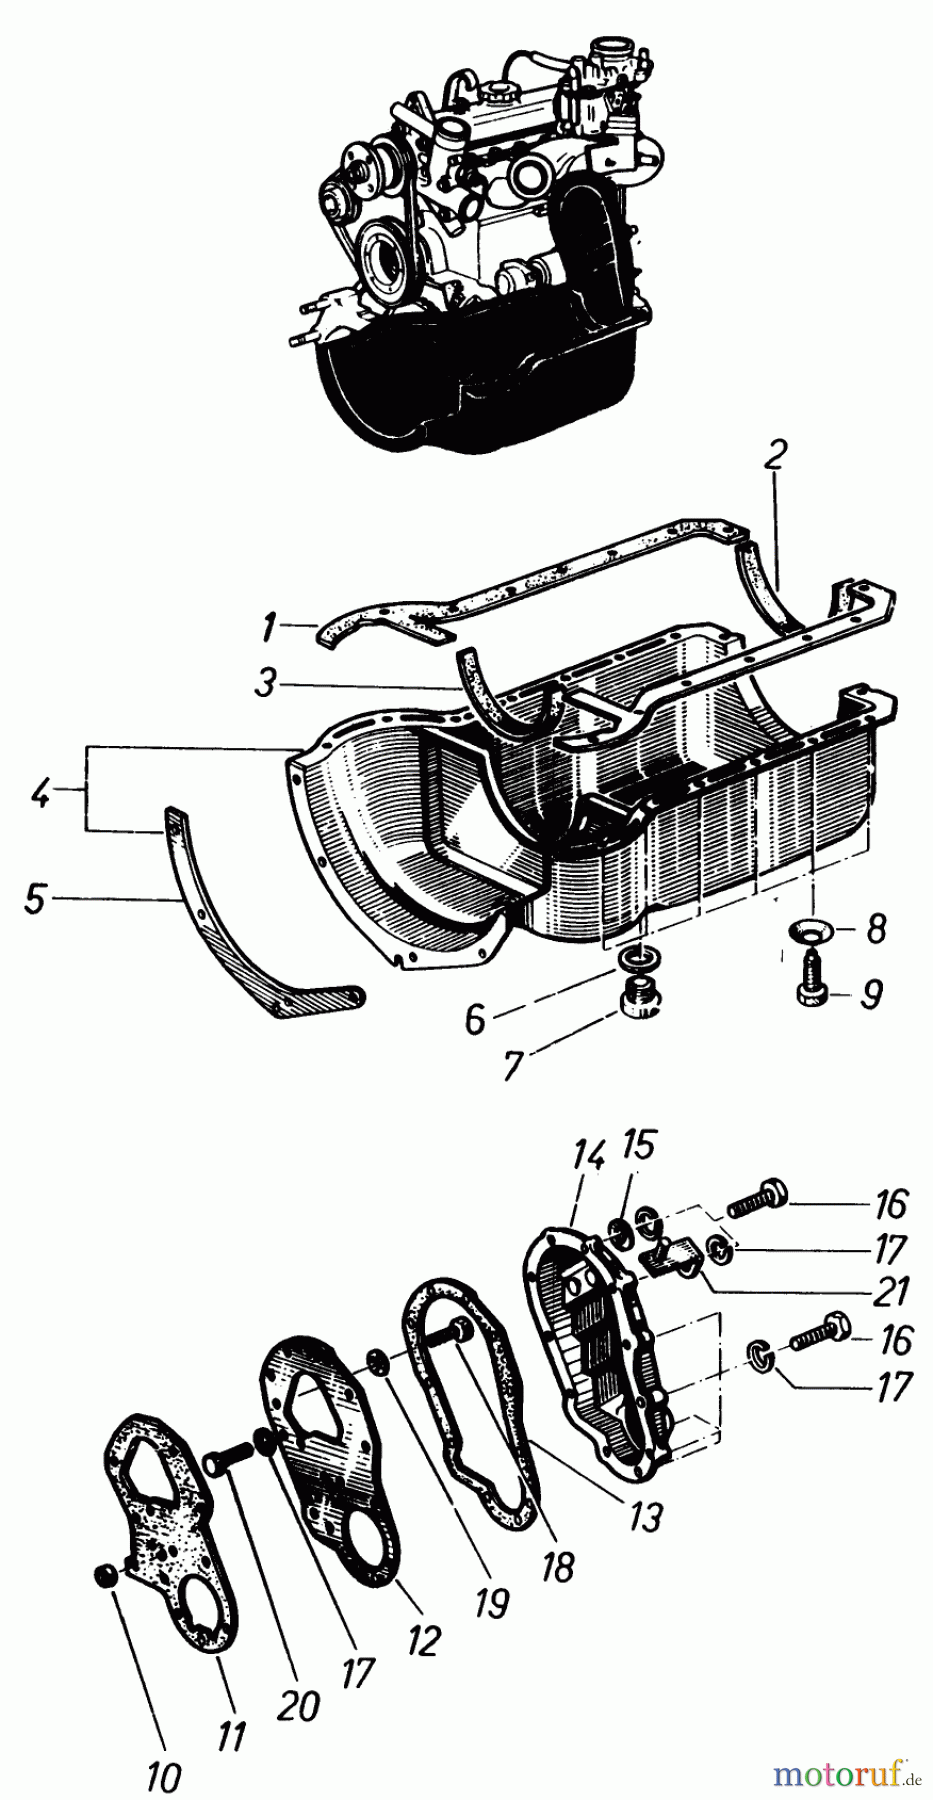  Toro Neu Mowers, Lawn & Garden Tractor Seite 2 91-20RG01 (D-250) - Toro D-250 10-Speed Tractor, 1980 OIL PAN AND TIMING CHAIN COVER